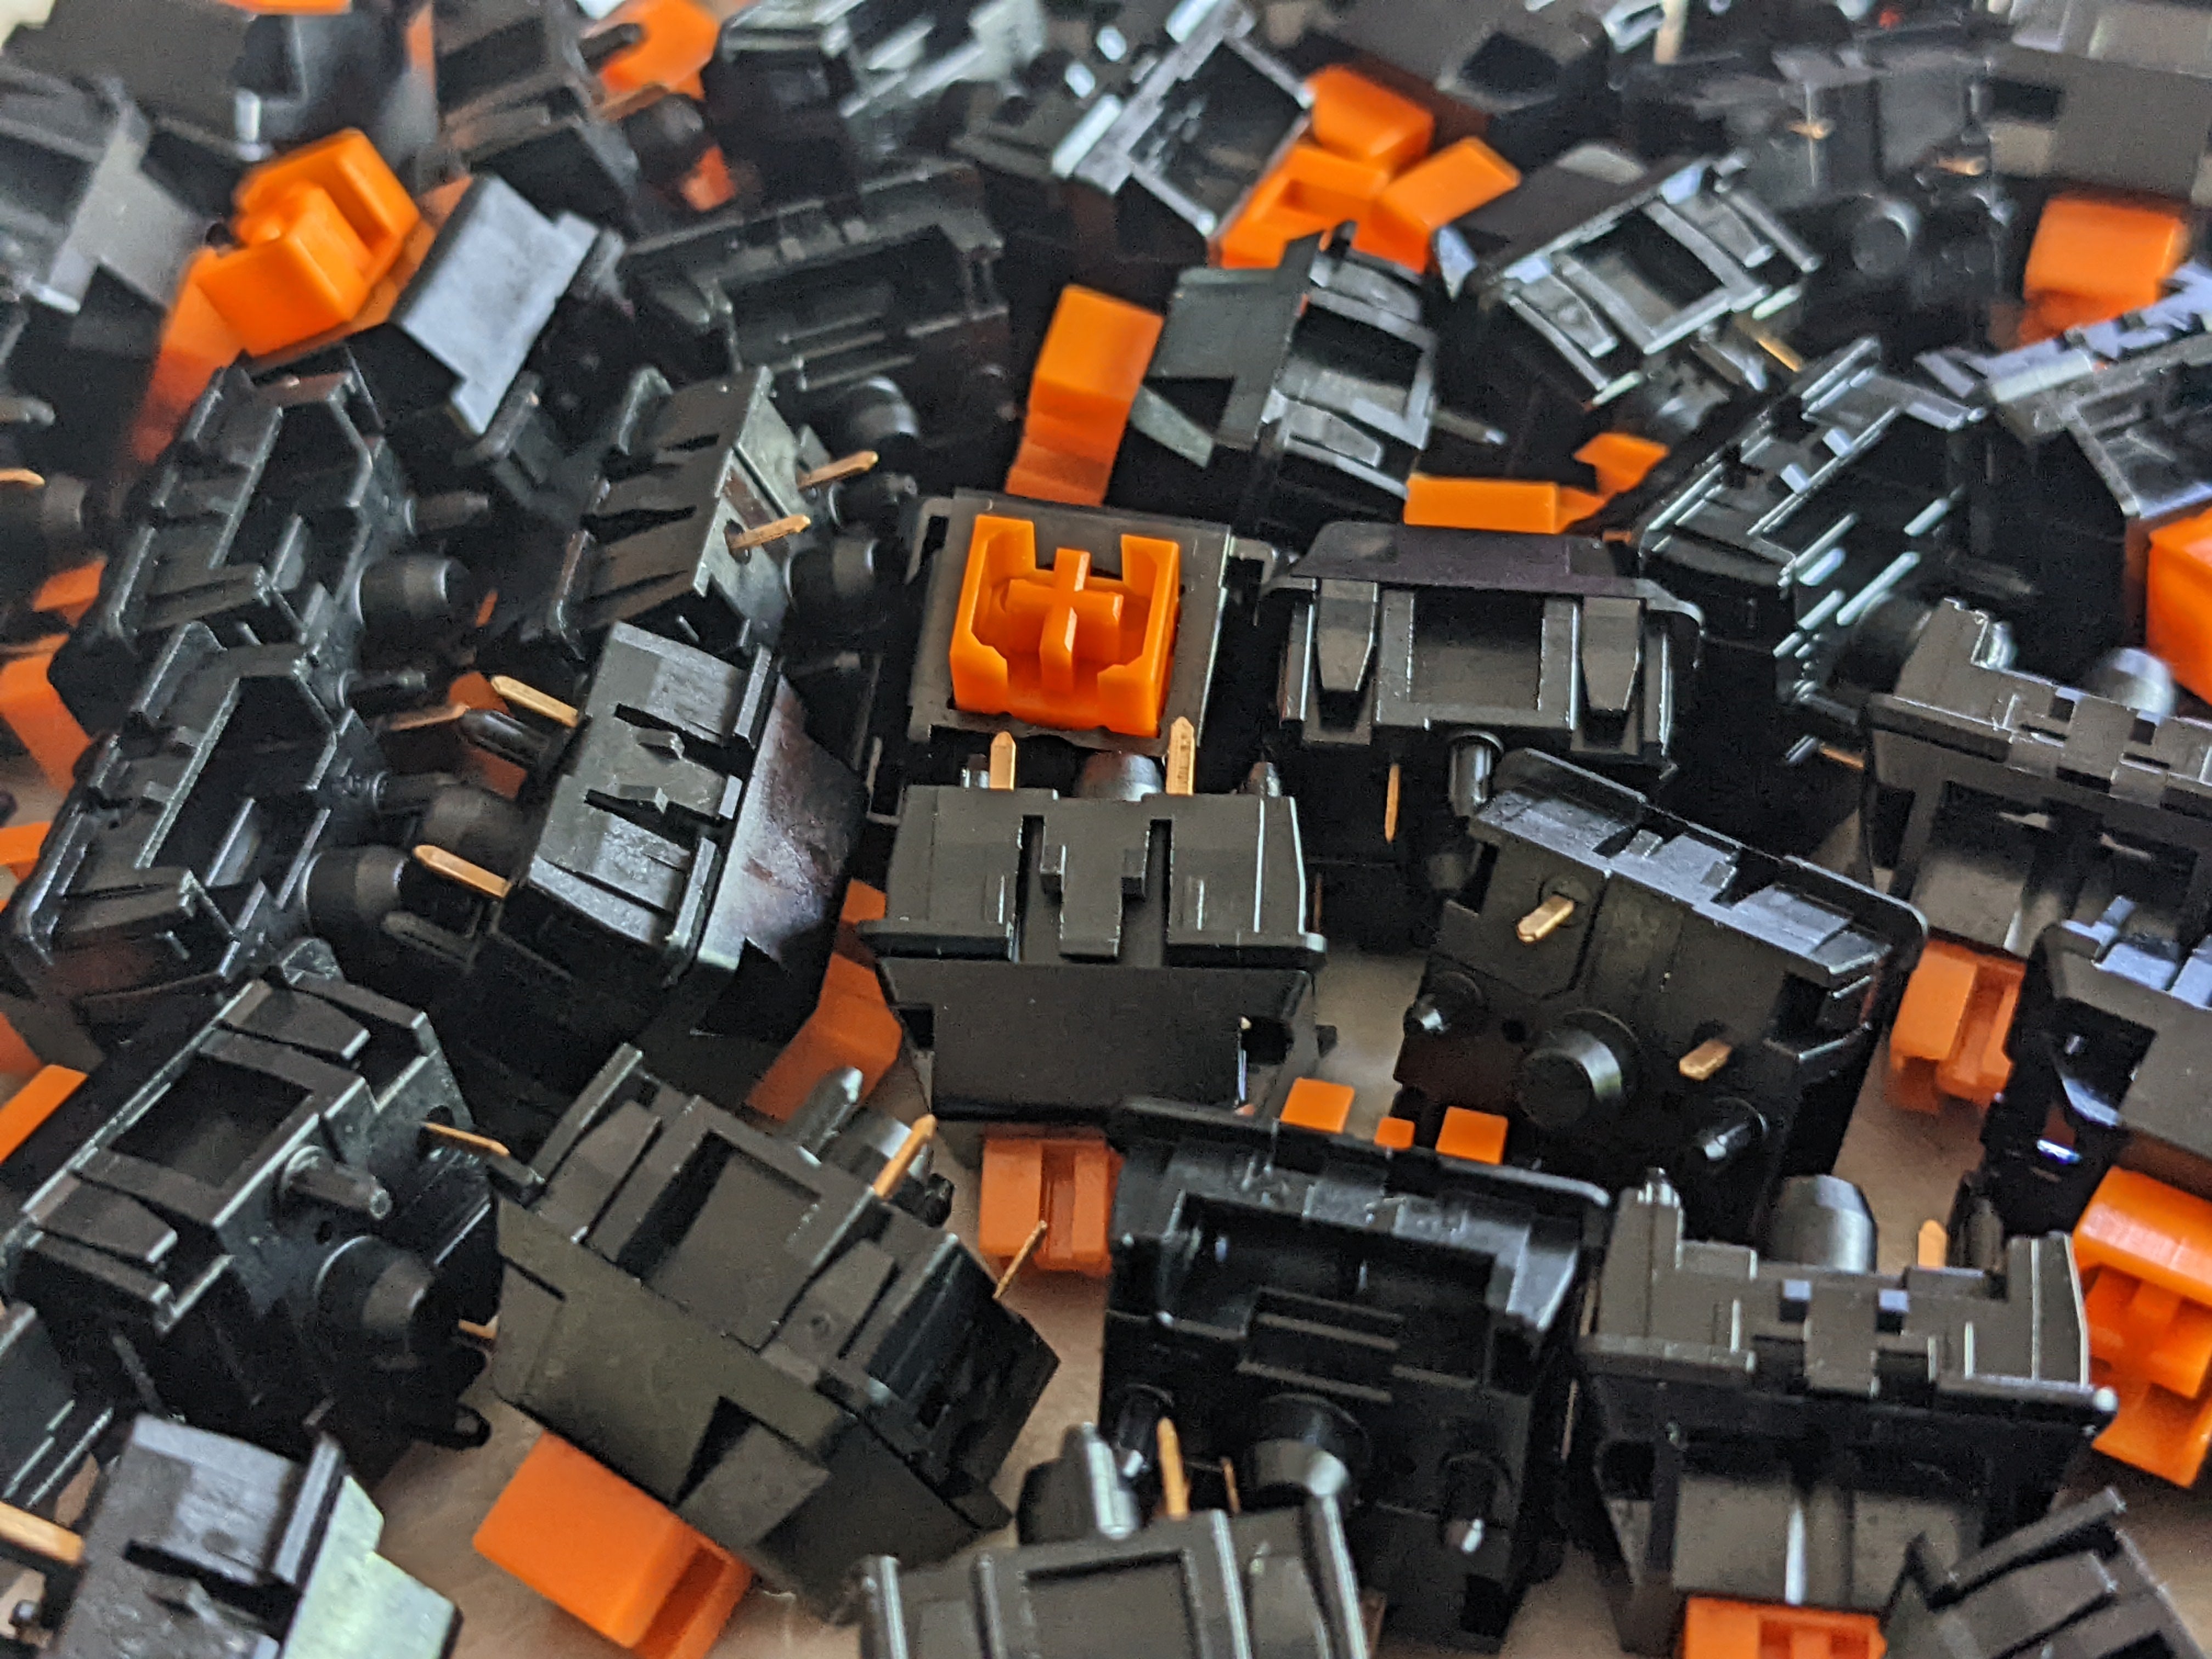 A heaping pile of Trash Switches